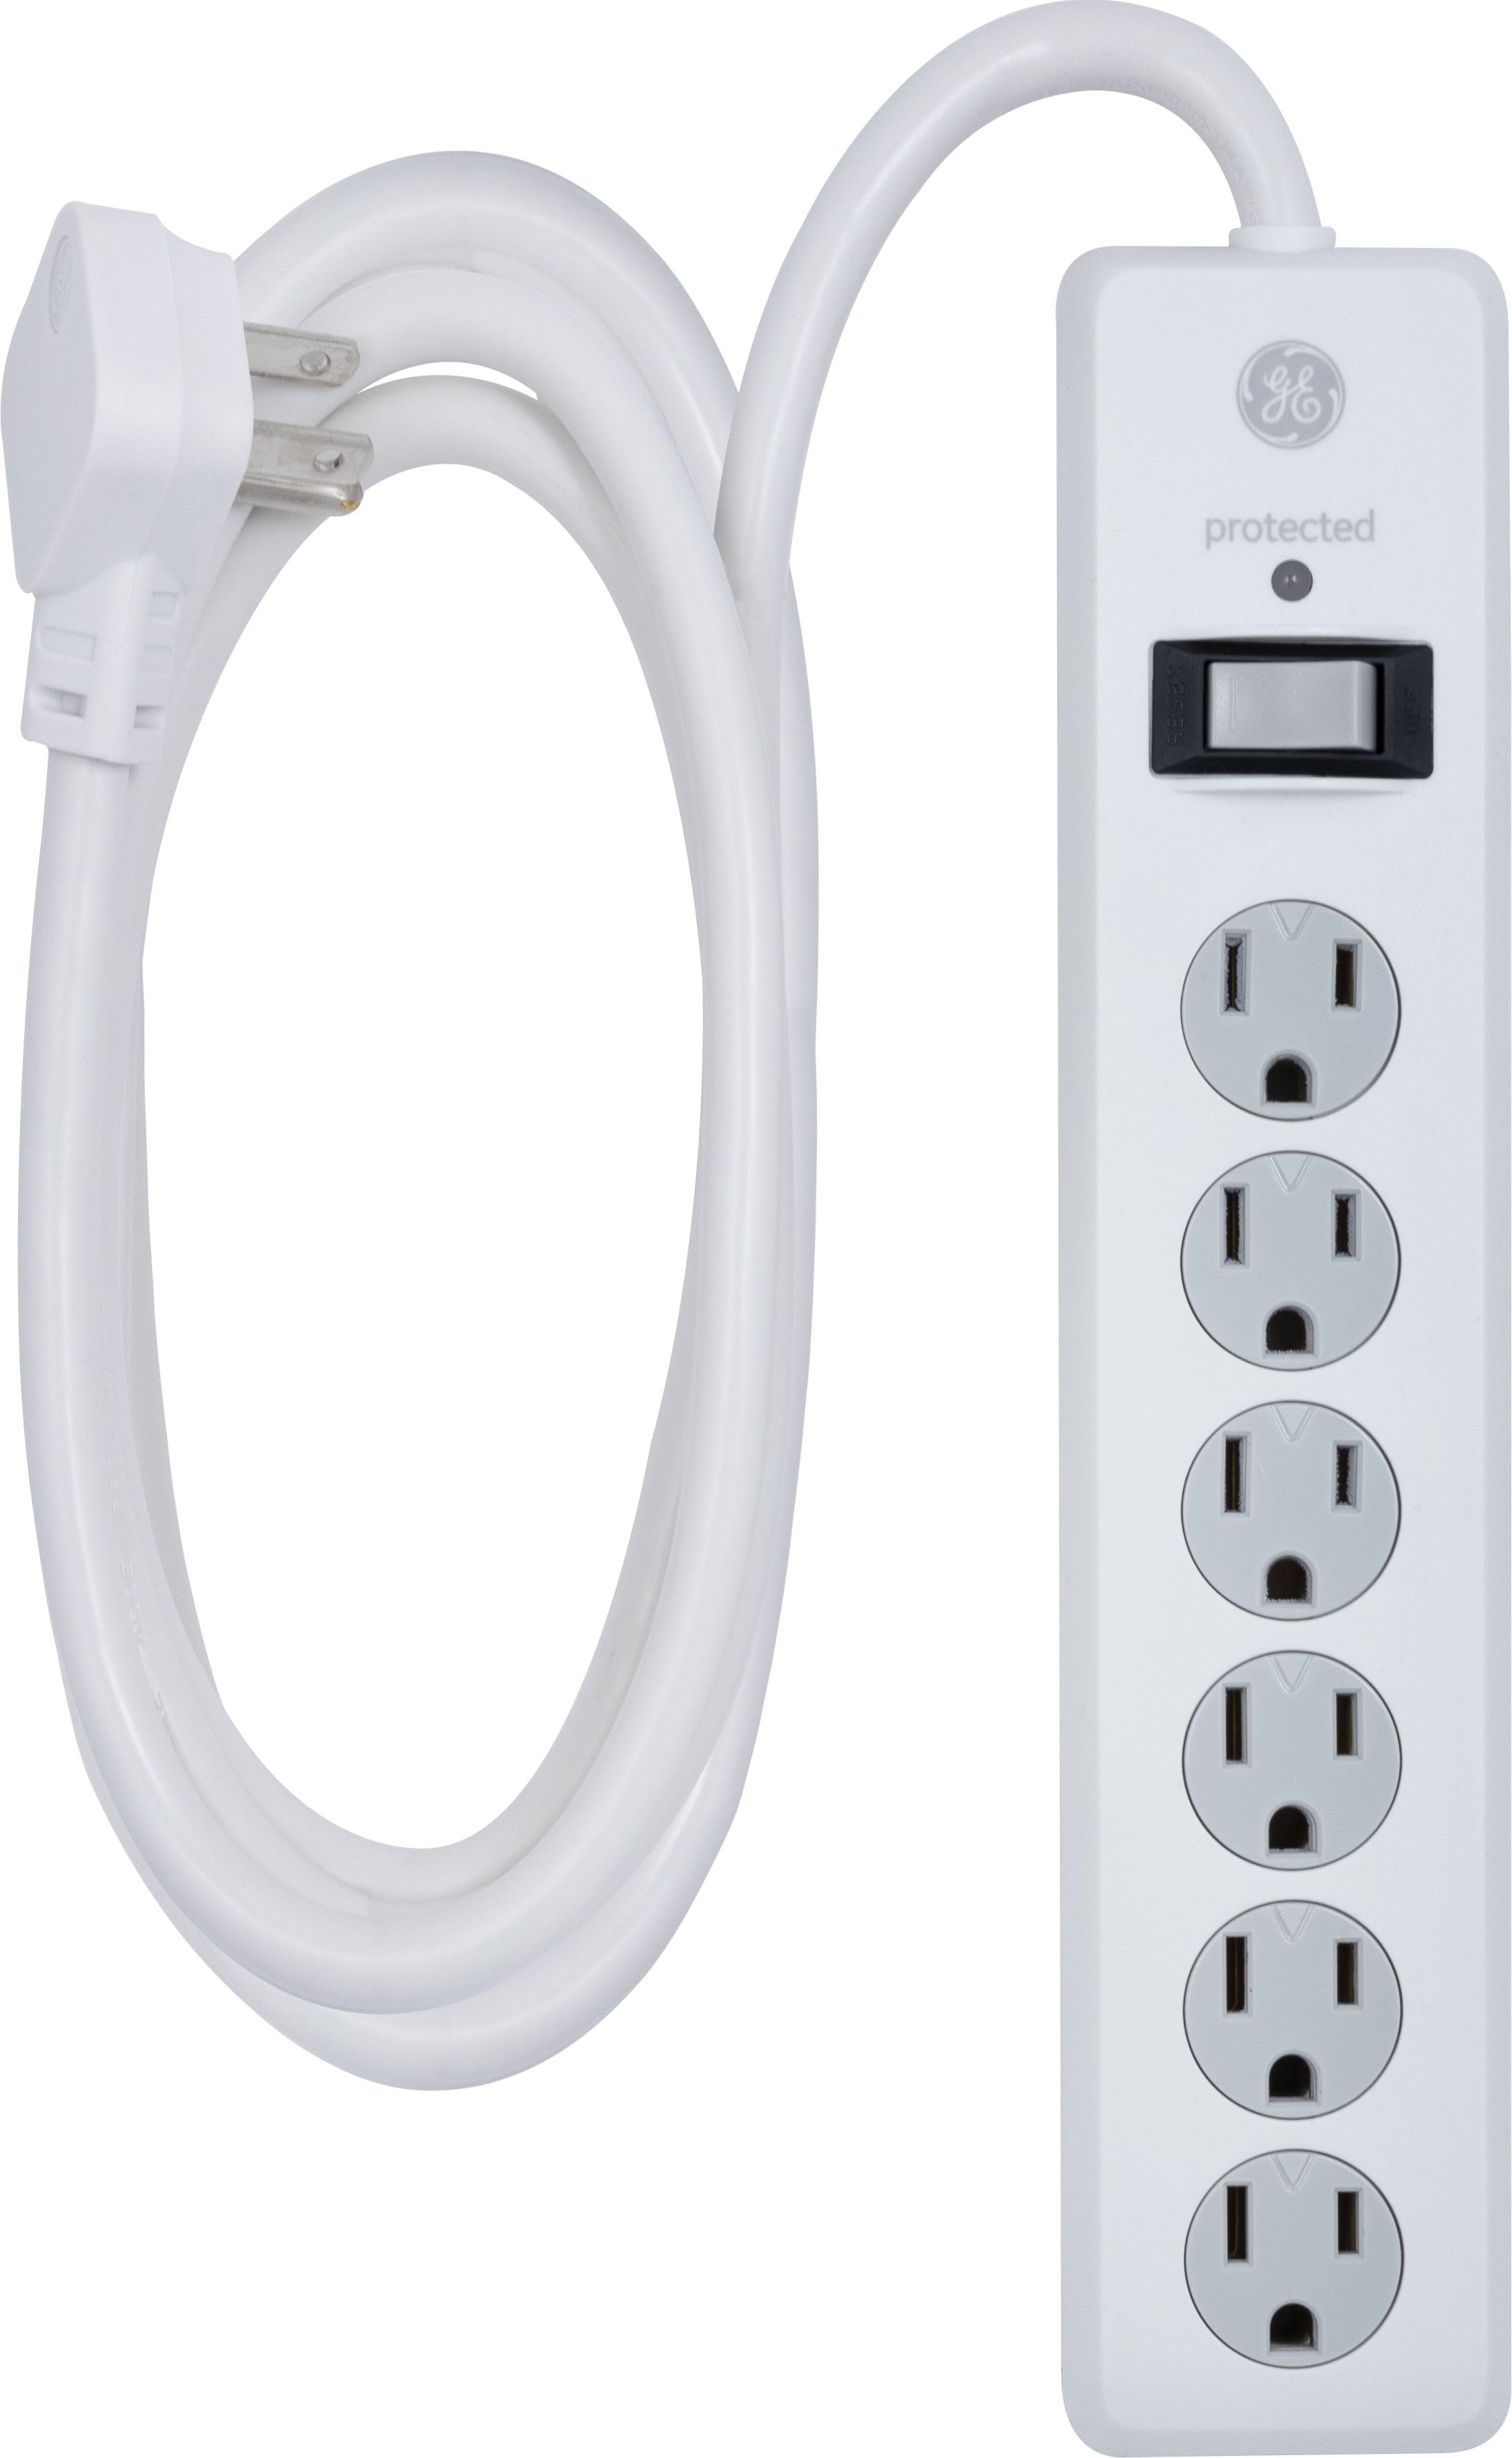 GE 6-Outlet Surge Protector Power Strip,10 ft. Extension Cord, White 